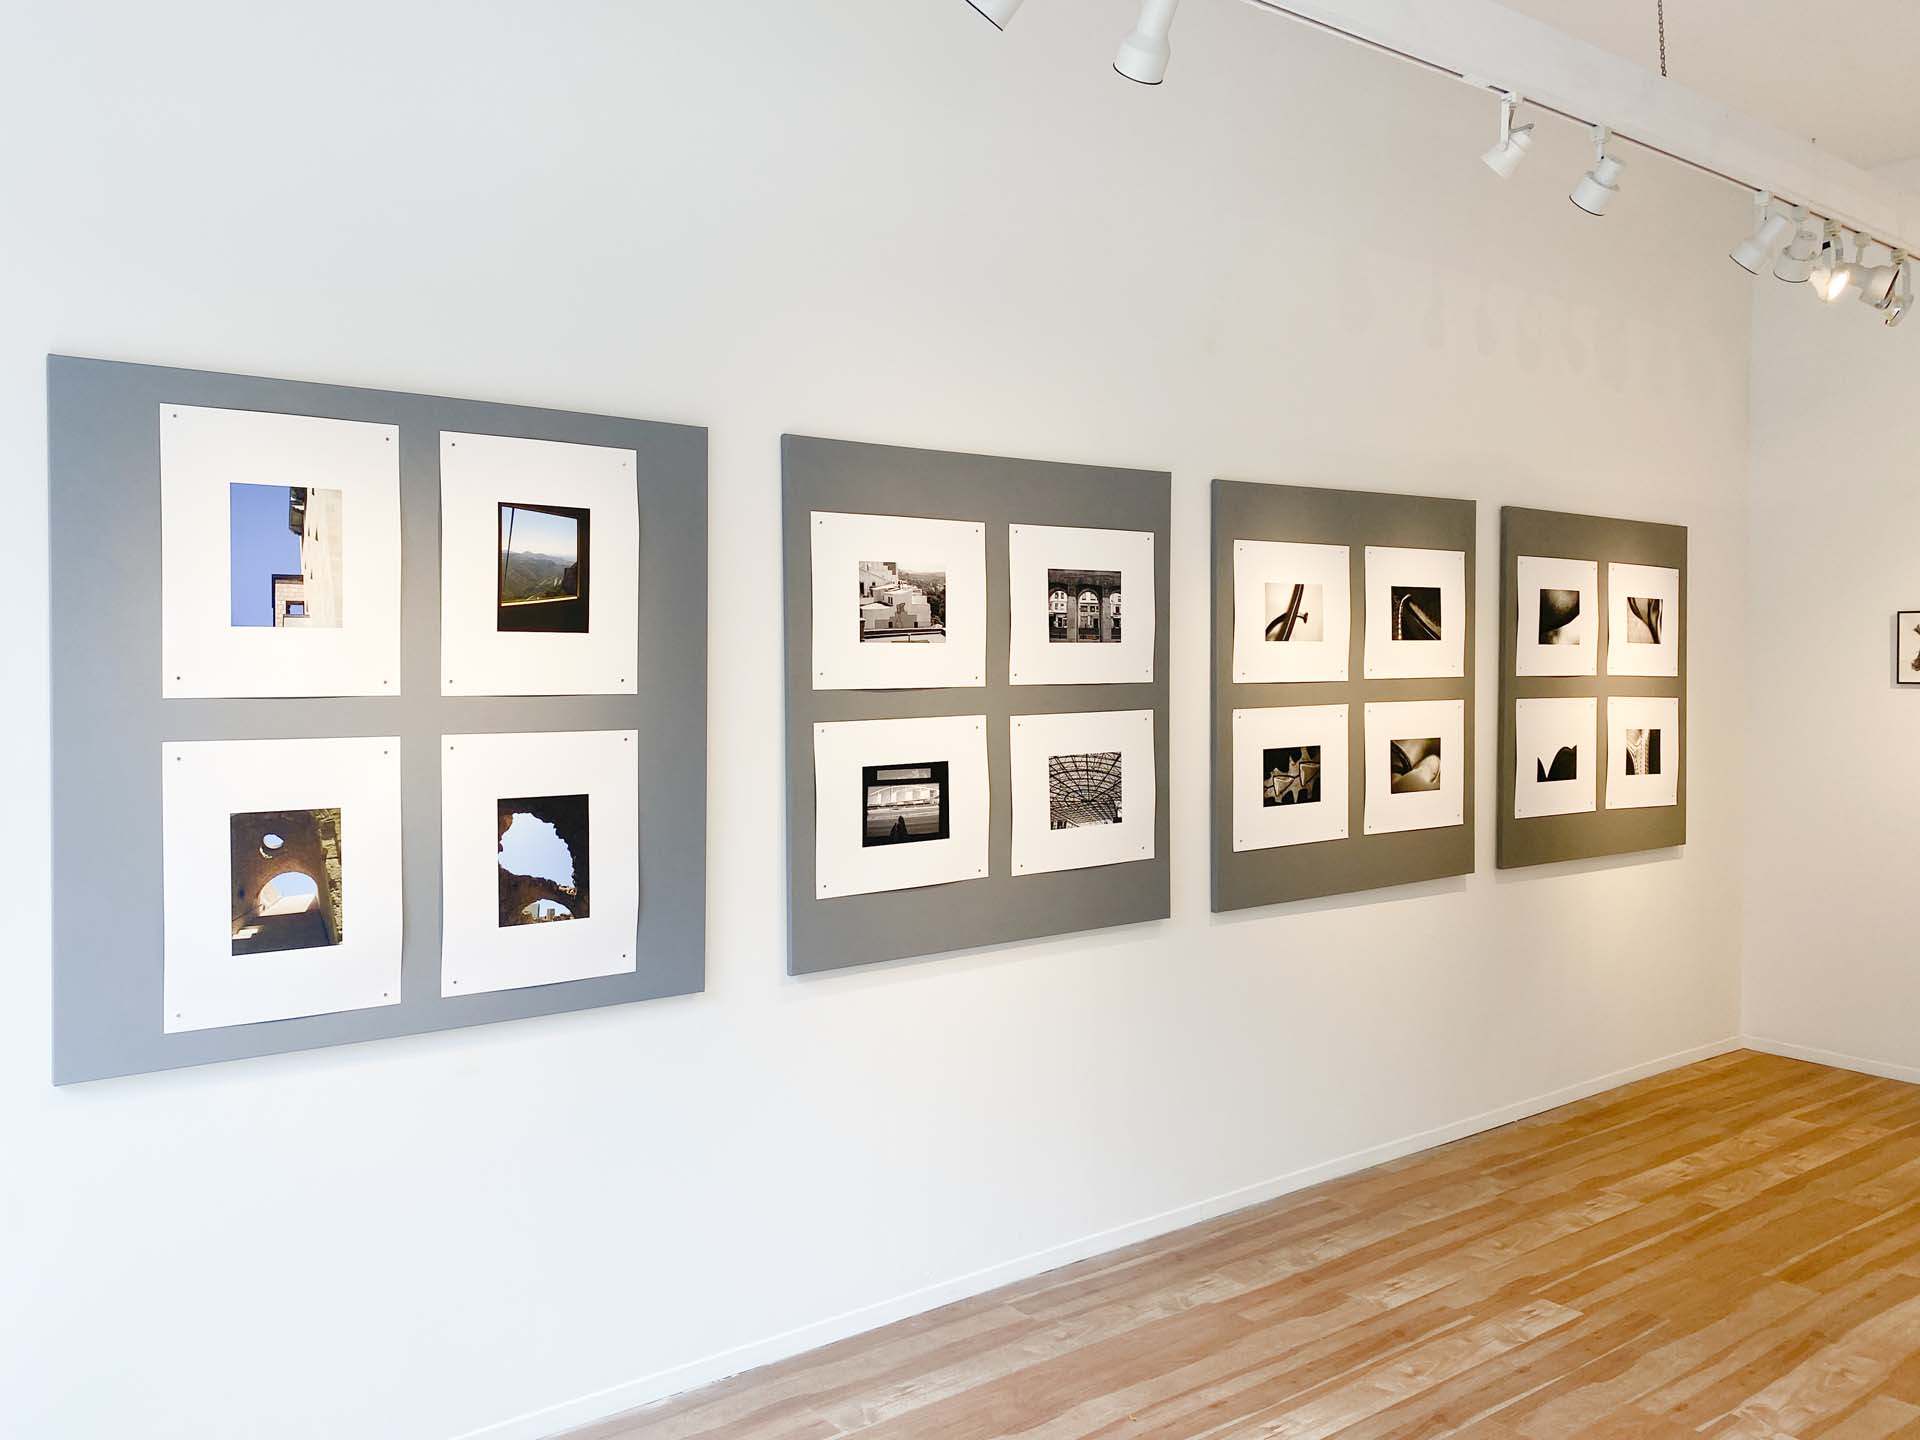 Installation view of Nadine Wyczolkowski: over/looked. Oct 4 to Oct 29, 2022. Centre[3] Members' Gallery.